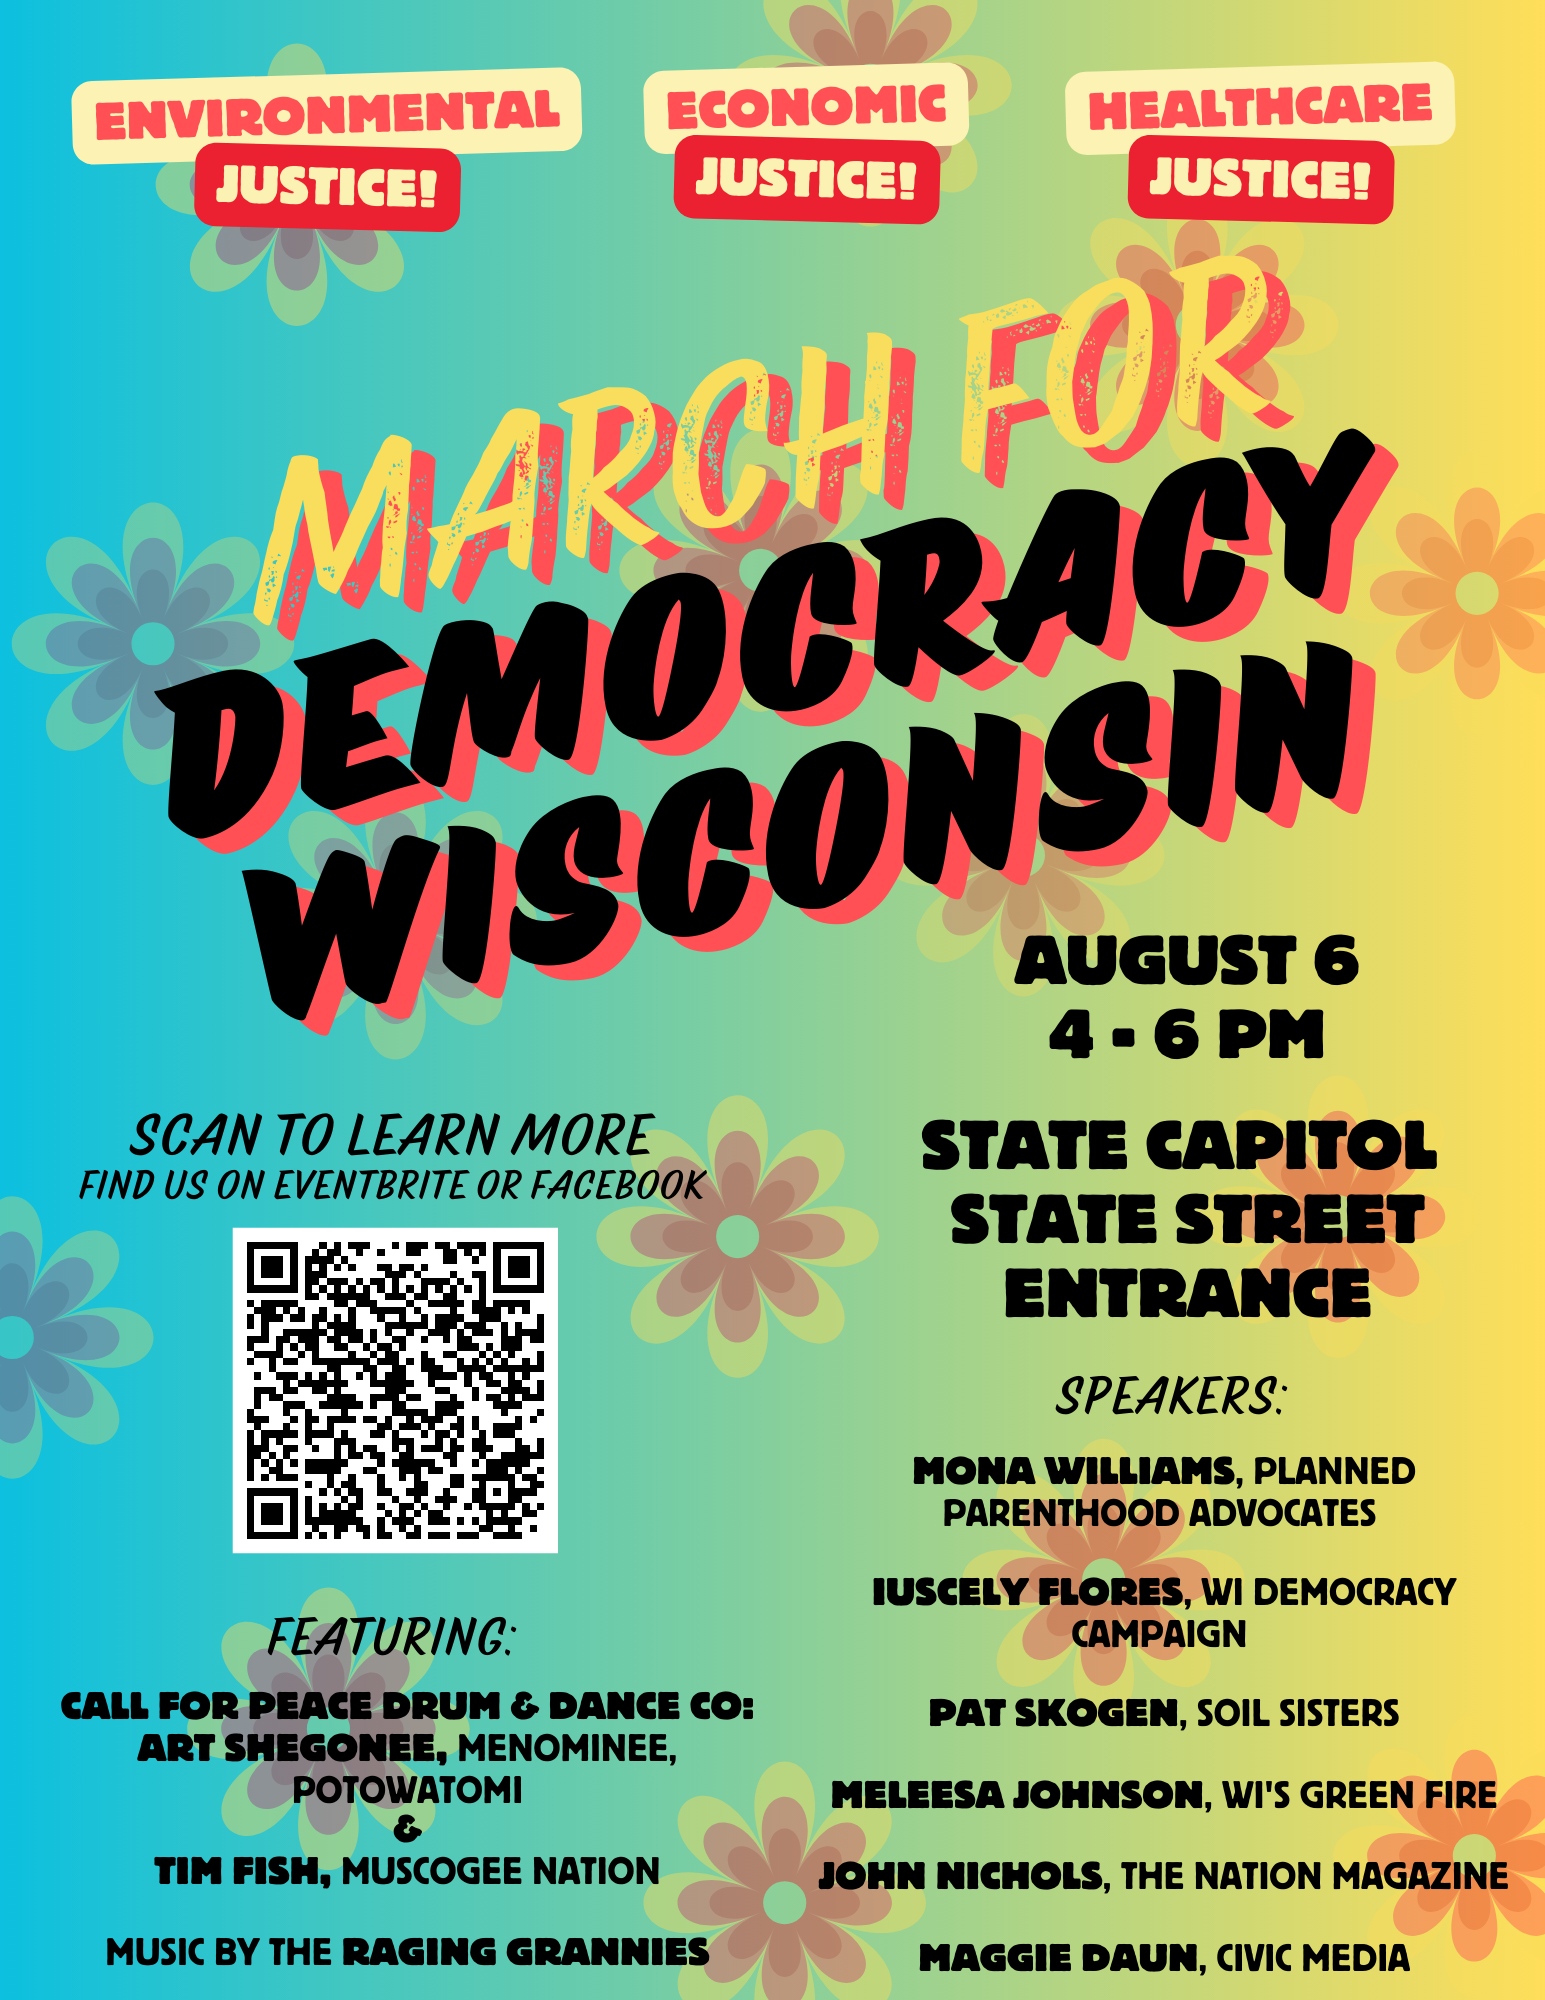 March for Democracy Wisconsin – August 6